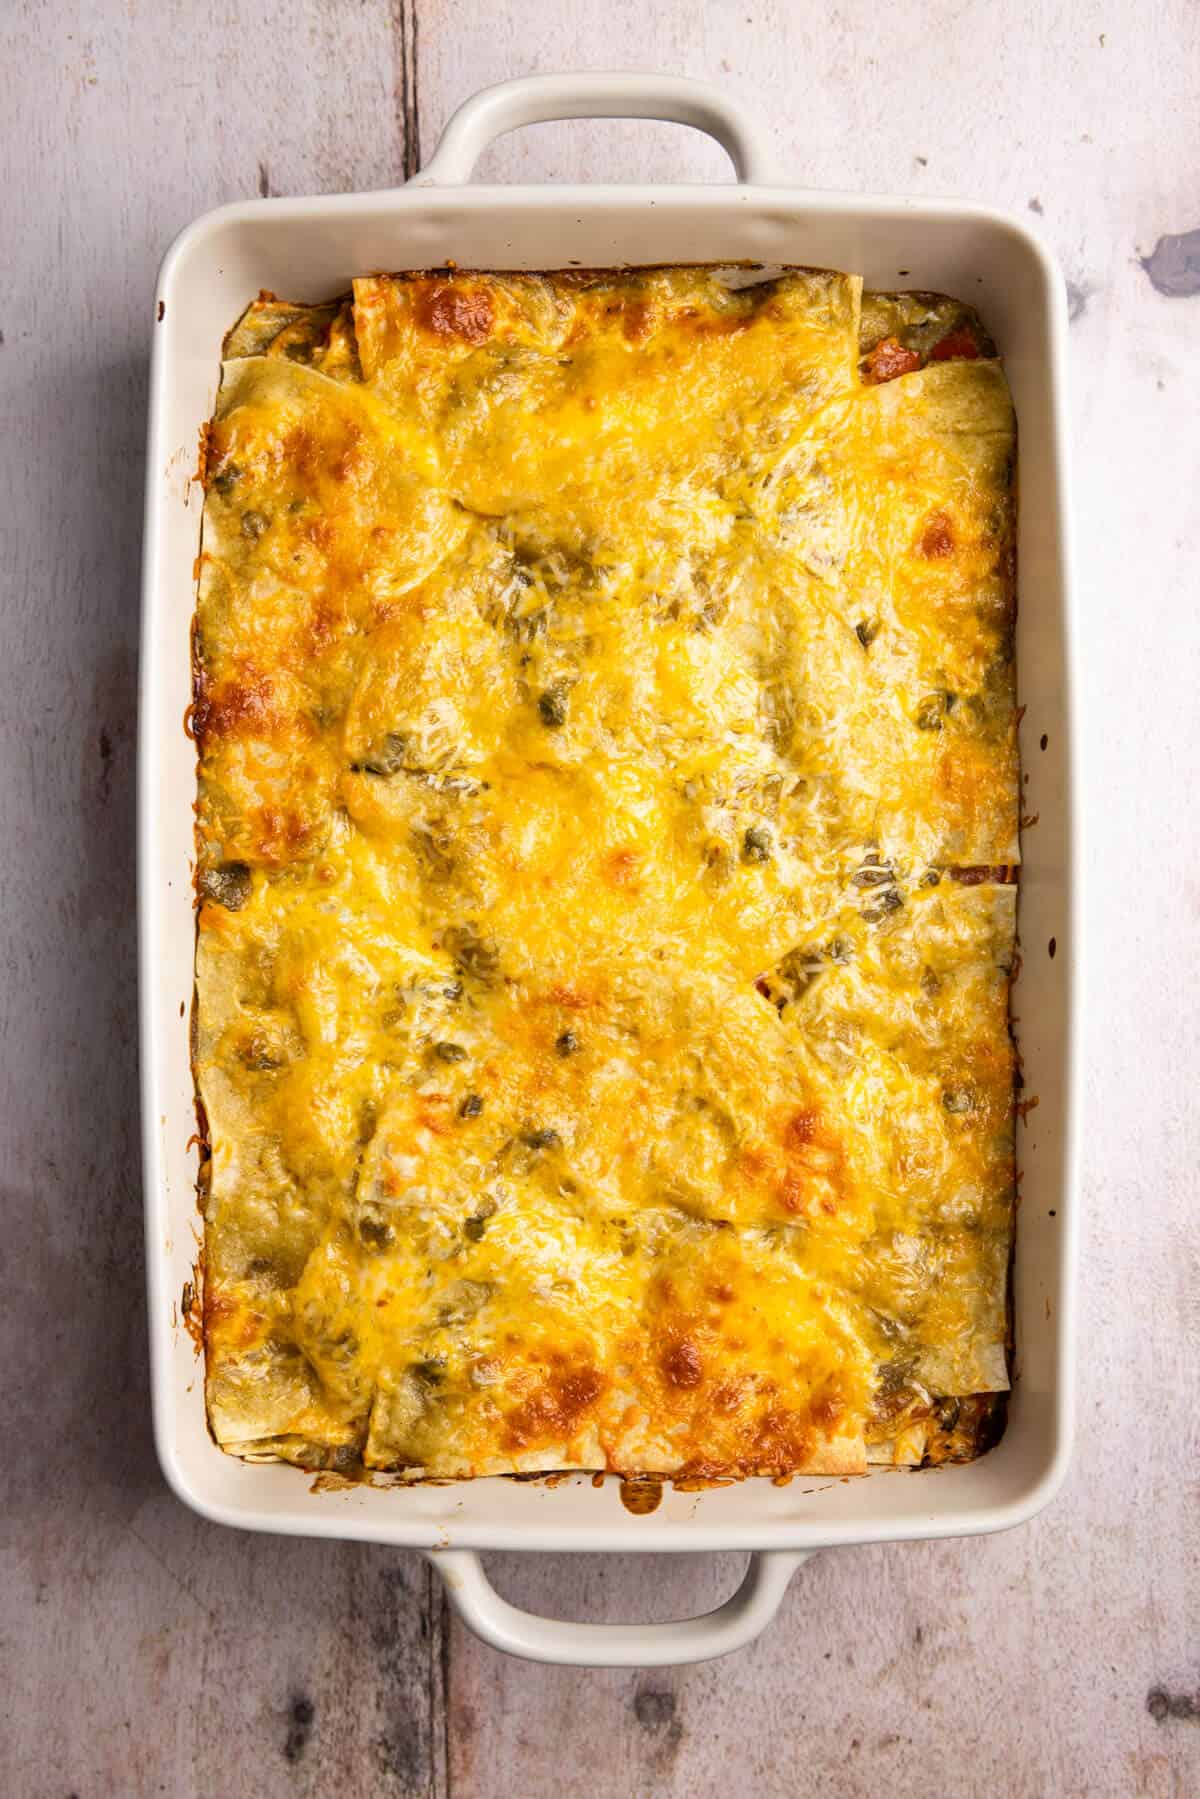 Lazy enchiladas baked in a 9x13 pan.